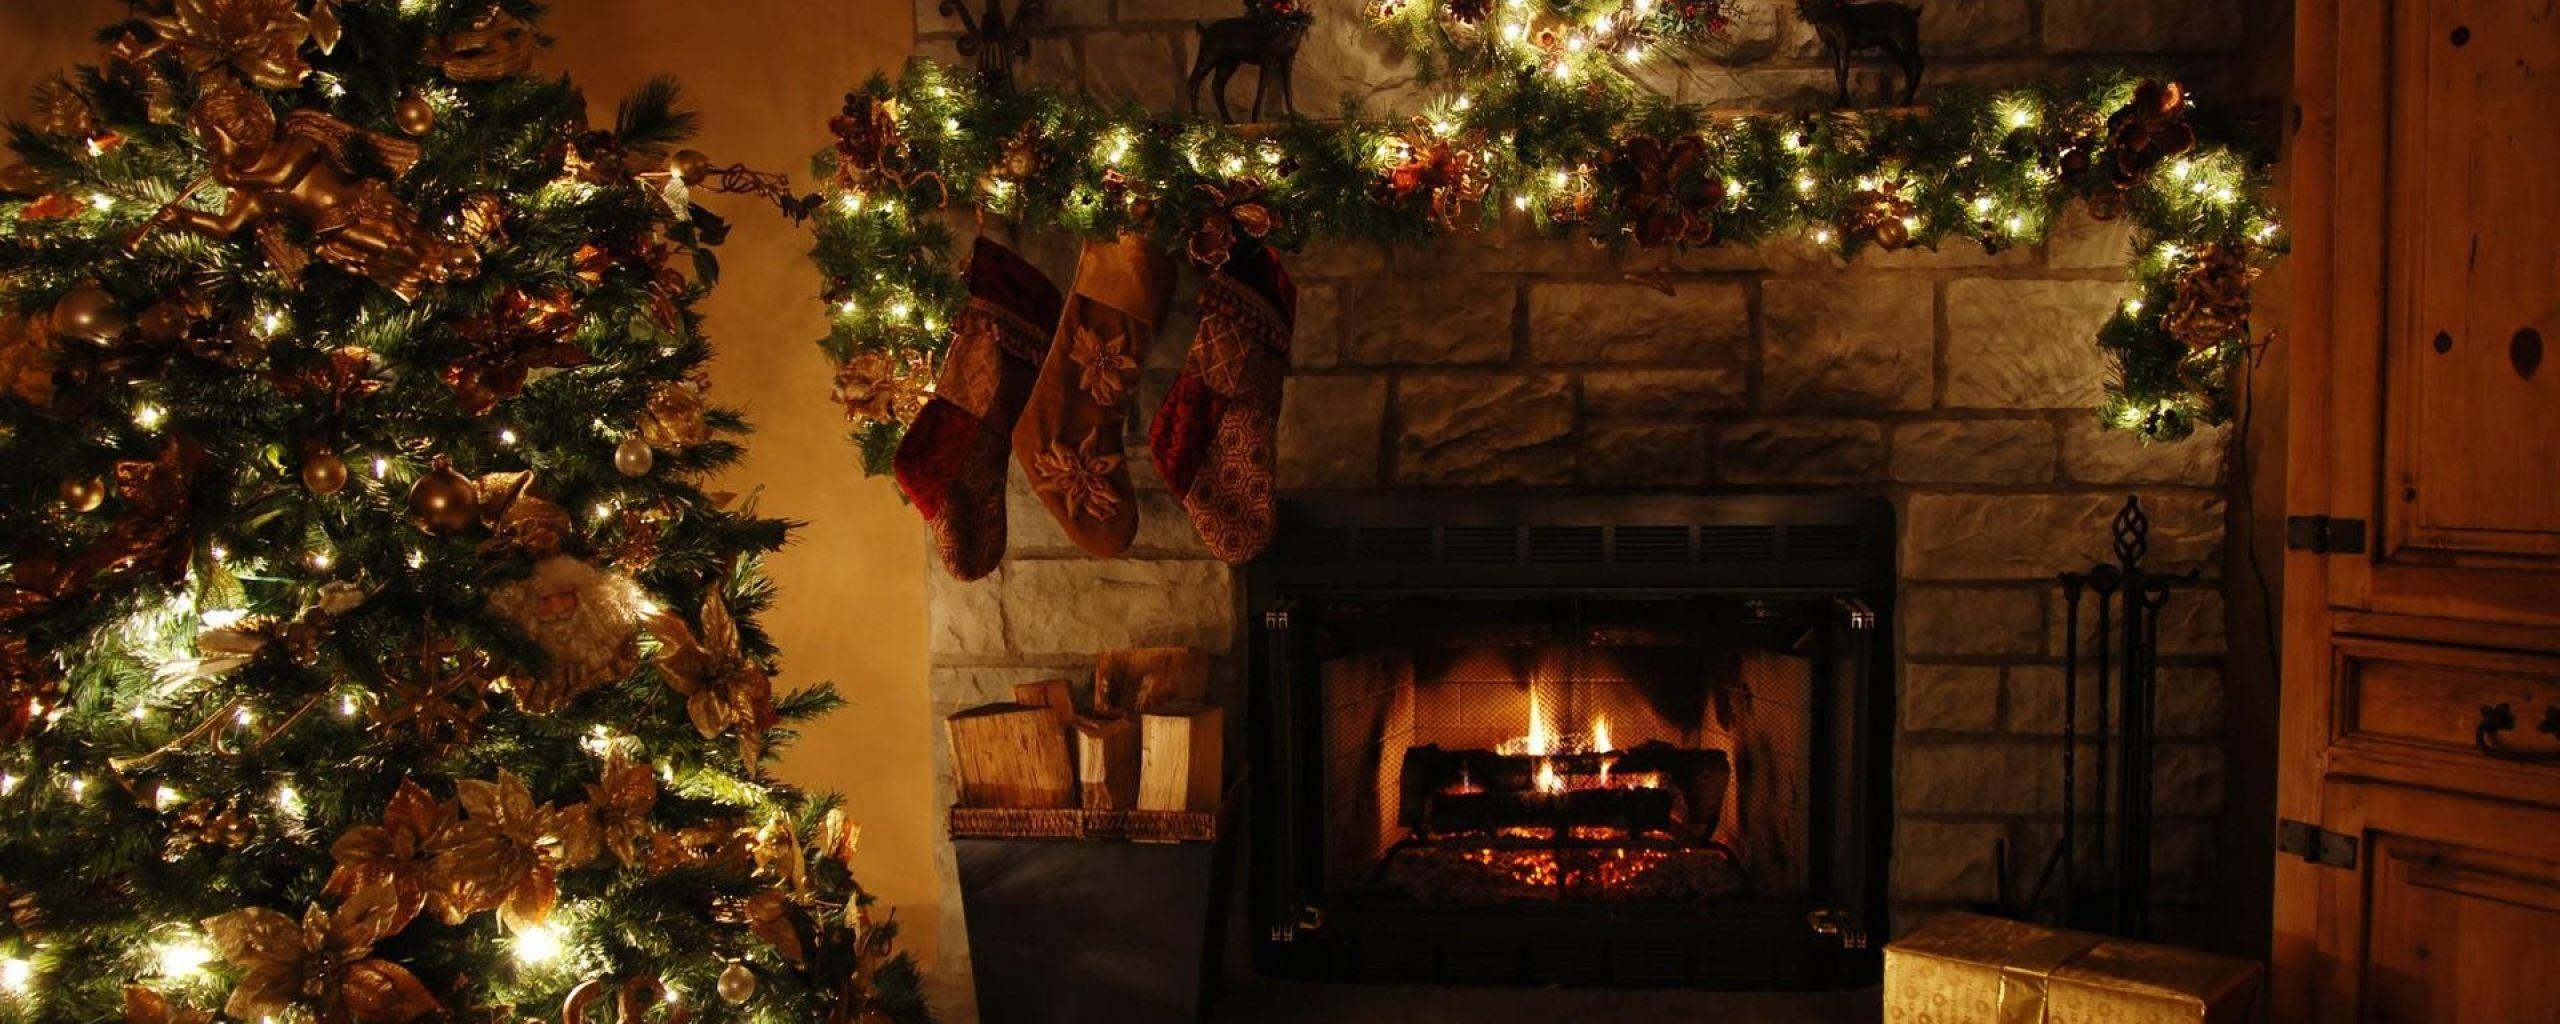 Christmas Fireplace Wallpapers - Wallpaper Cave